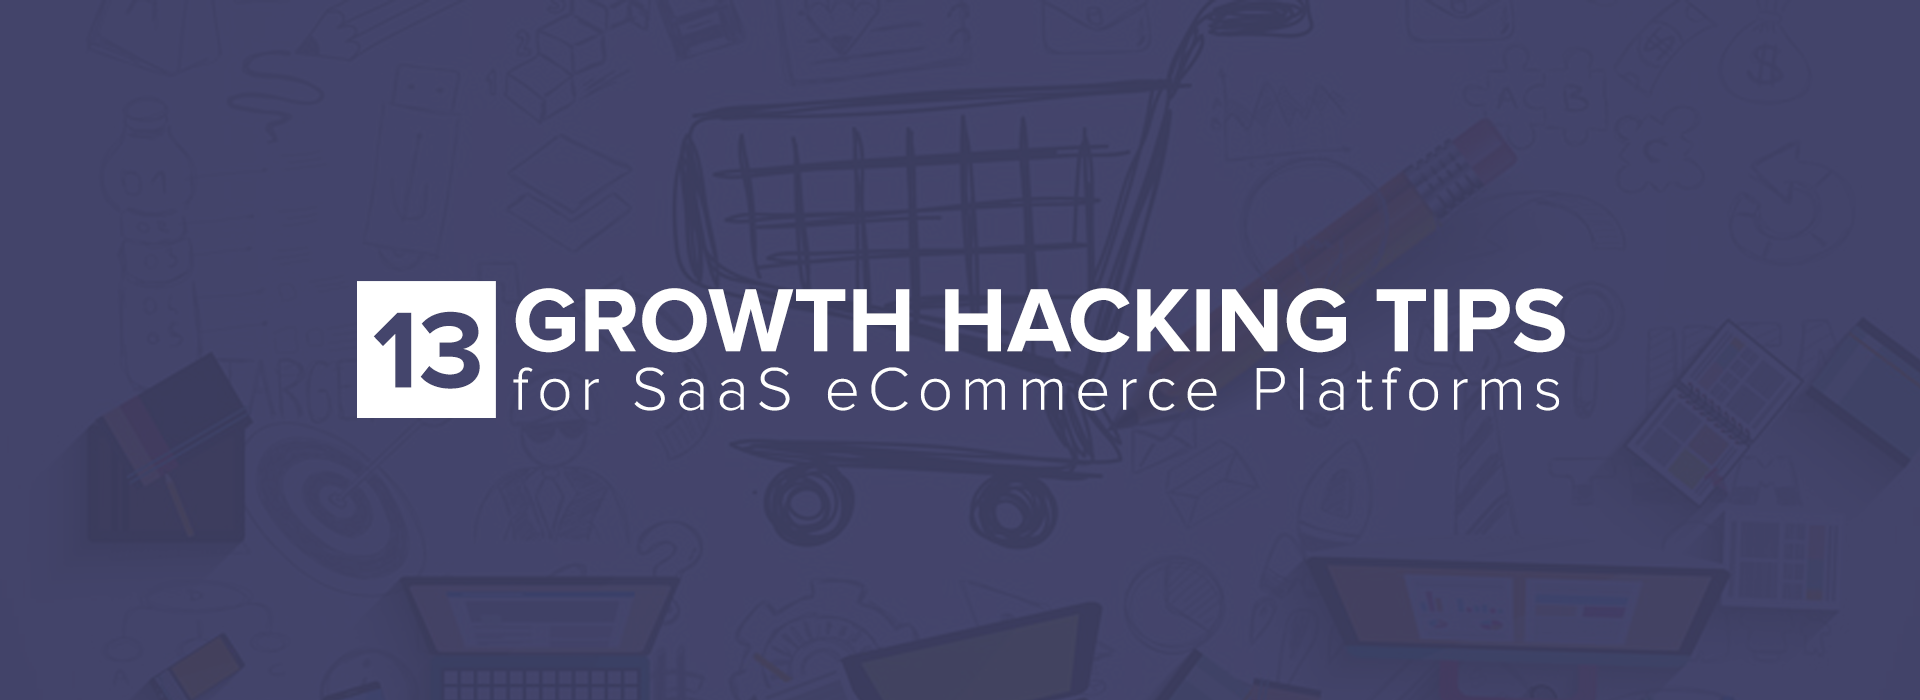 13-Growth-Hacking-Tips-for-SaaS-eCommerce-Platforms